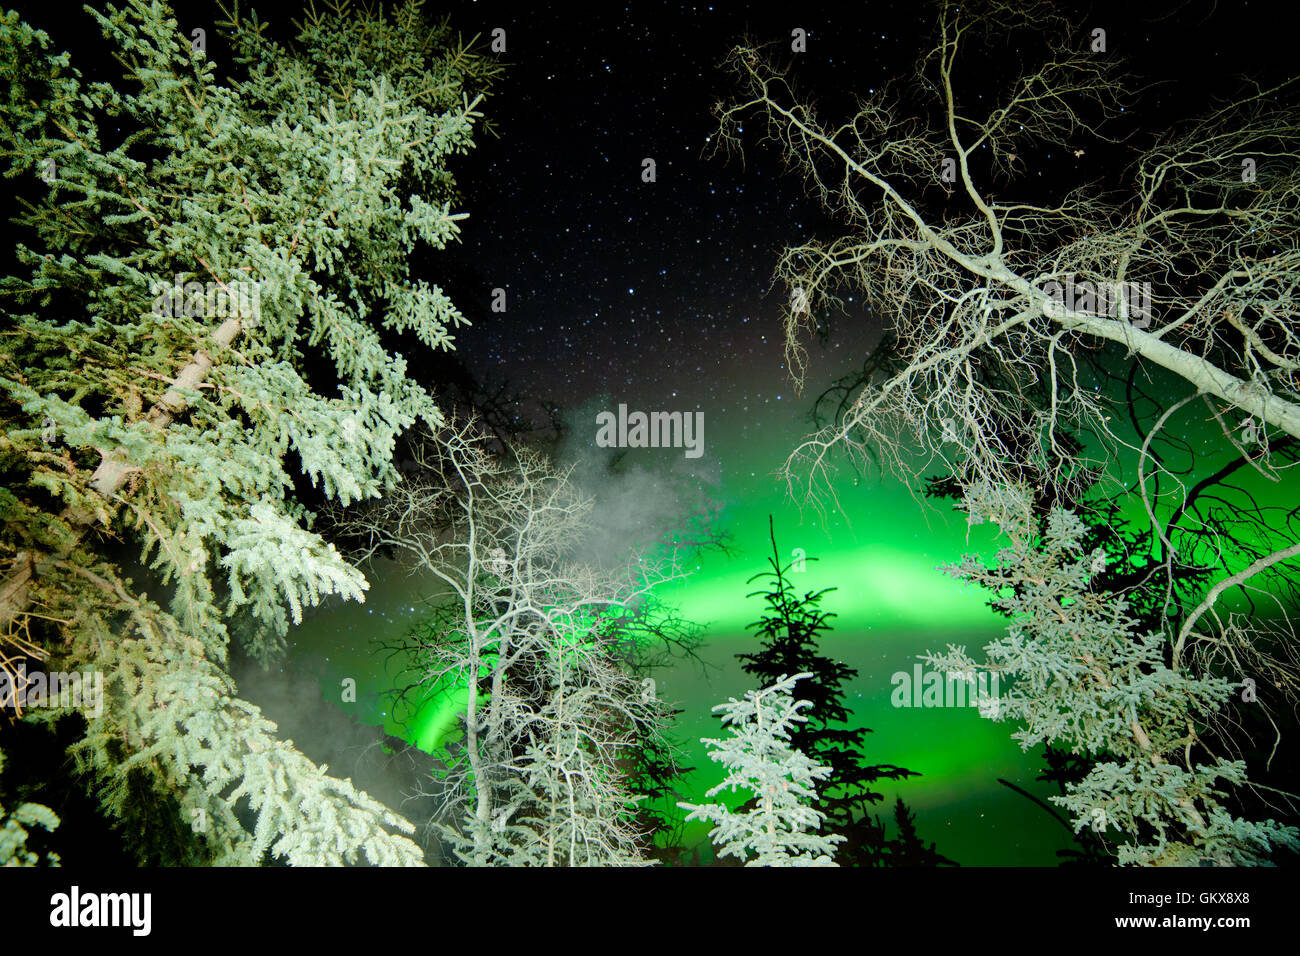 Star trails and Northern lights in sky over taiga Stock Photo